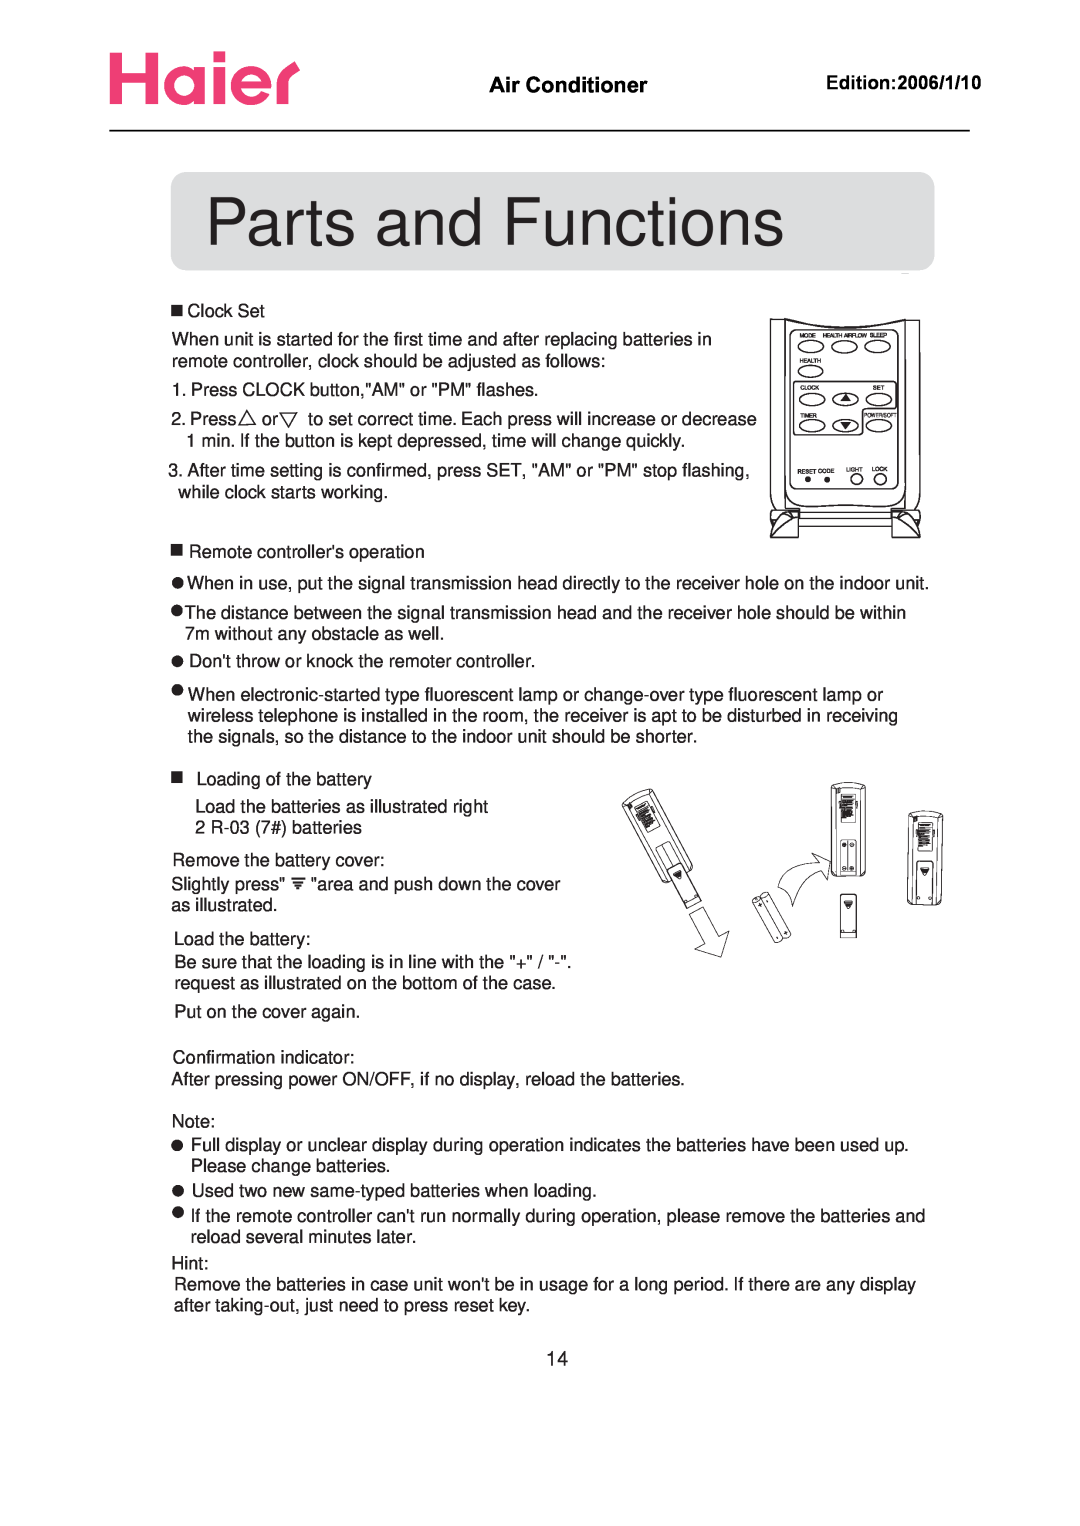 Haier Compact Air Conditioner manual Parts and Functions, Air Conditioner      , Edition 2006/1/10, Clock Set 